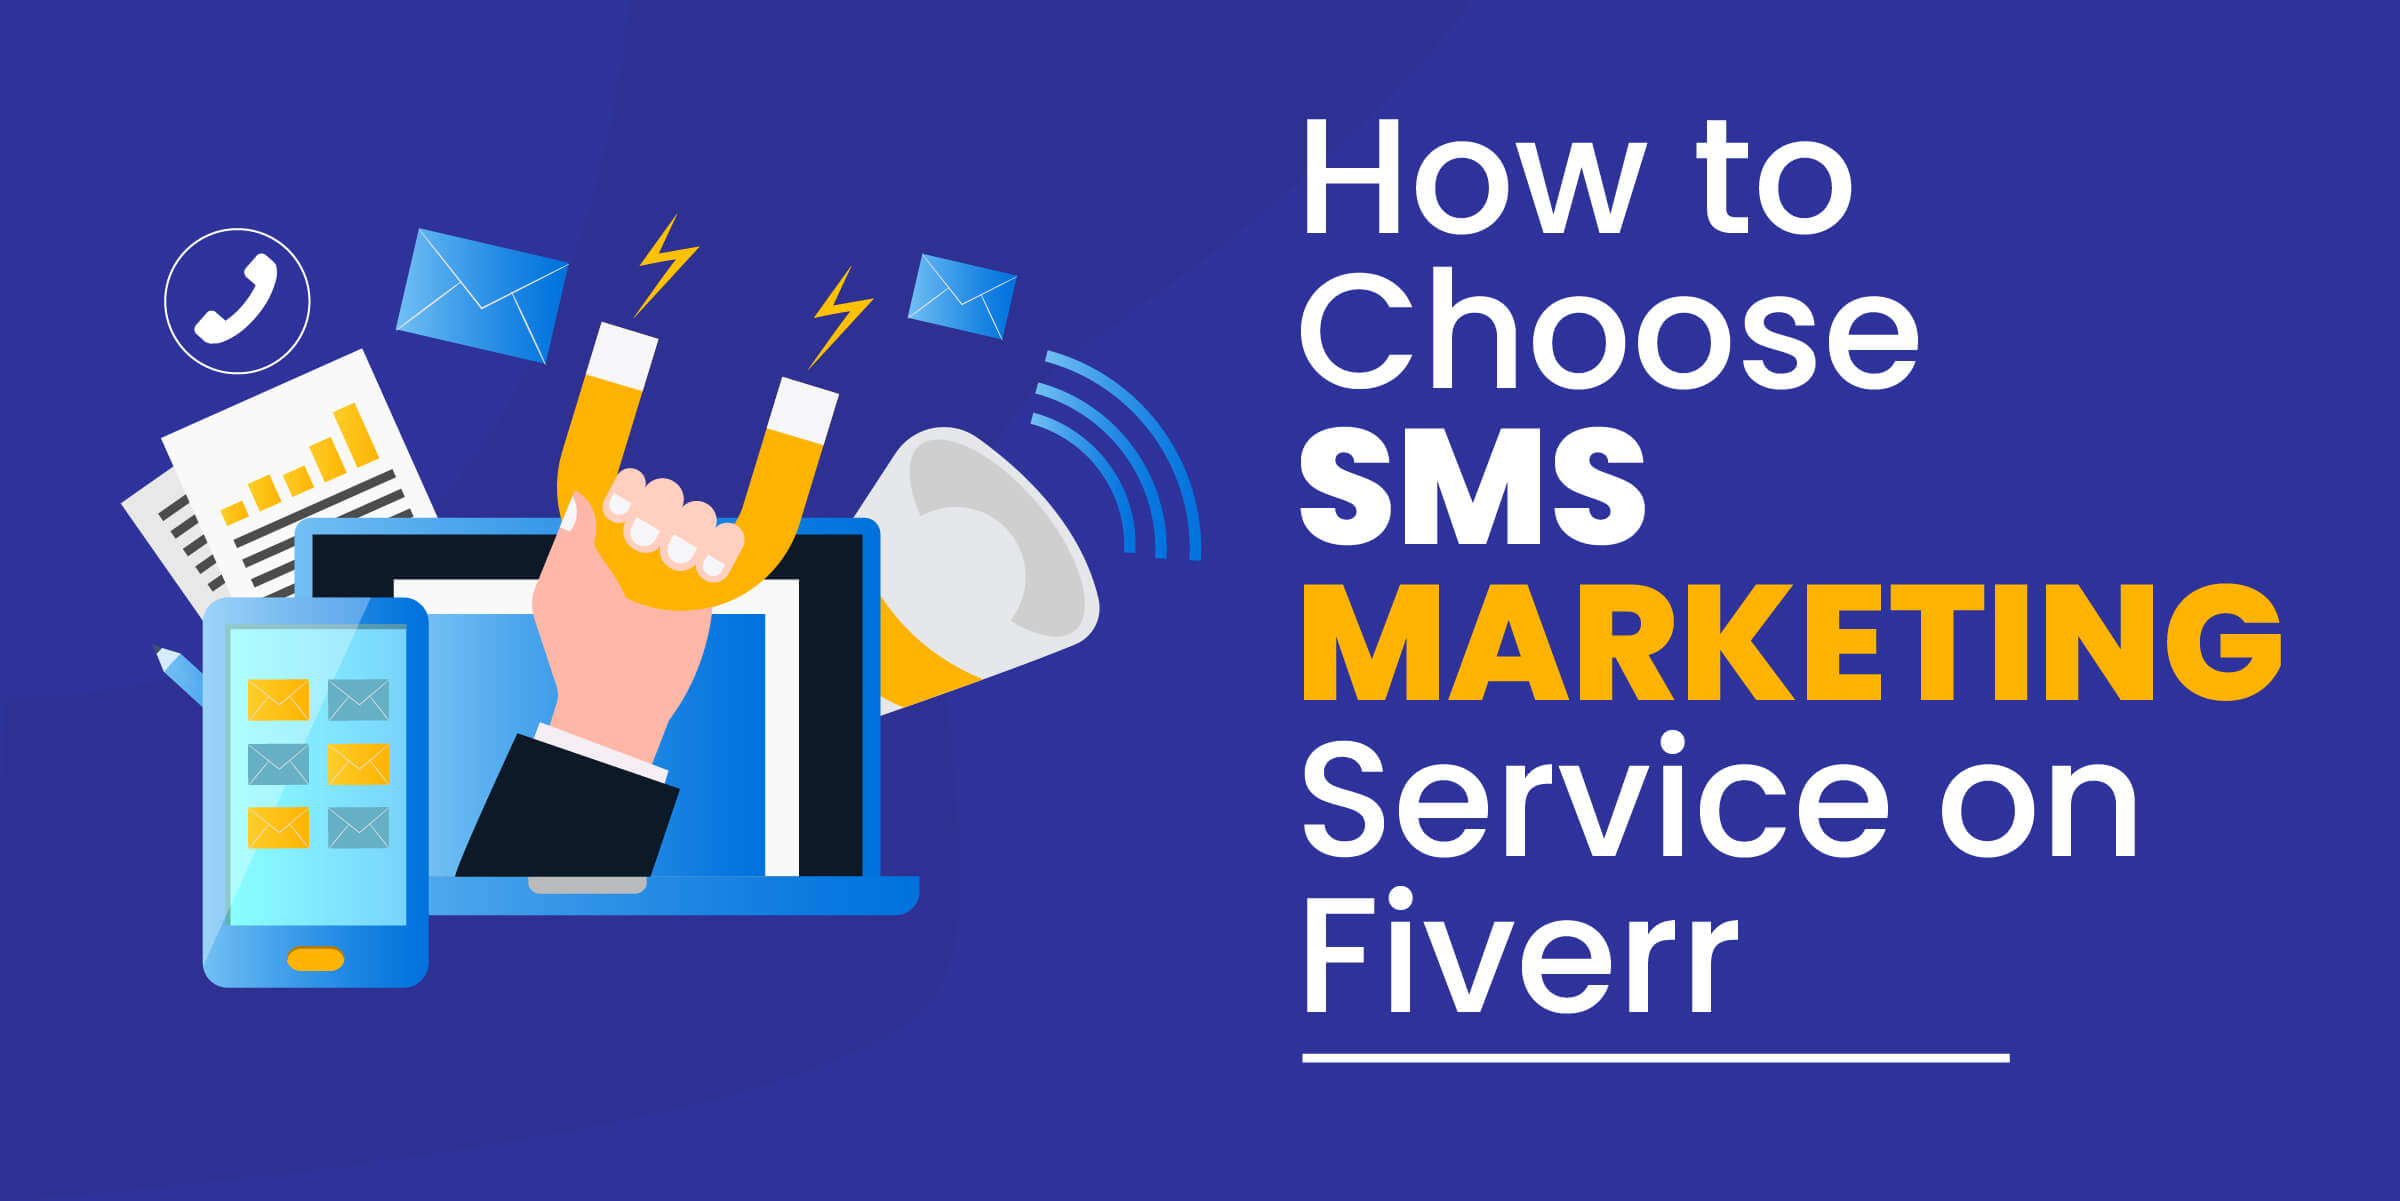 How to Choose SMS Marketing Service on Fiverr